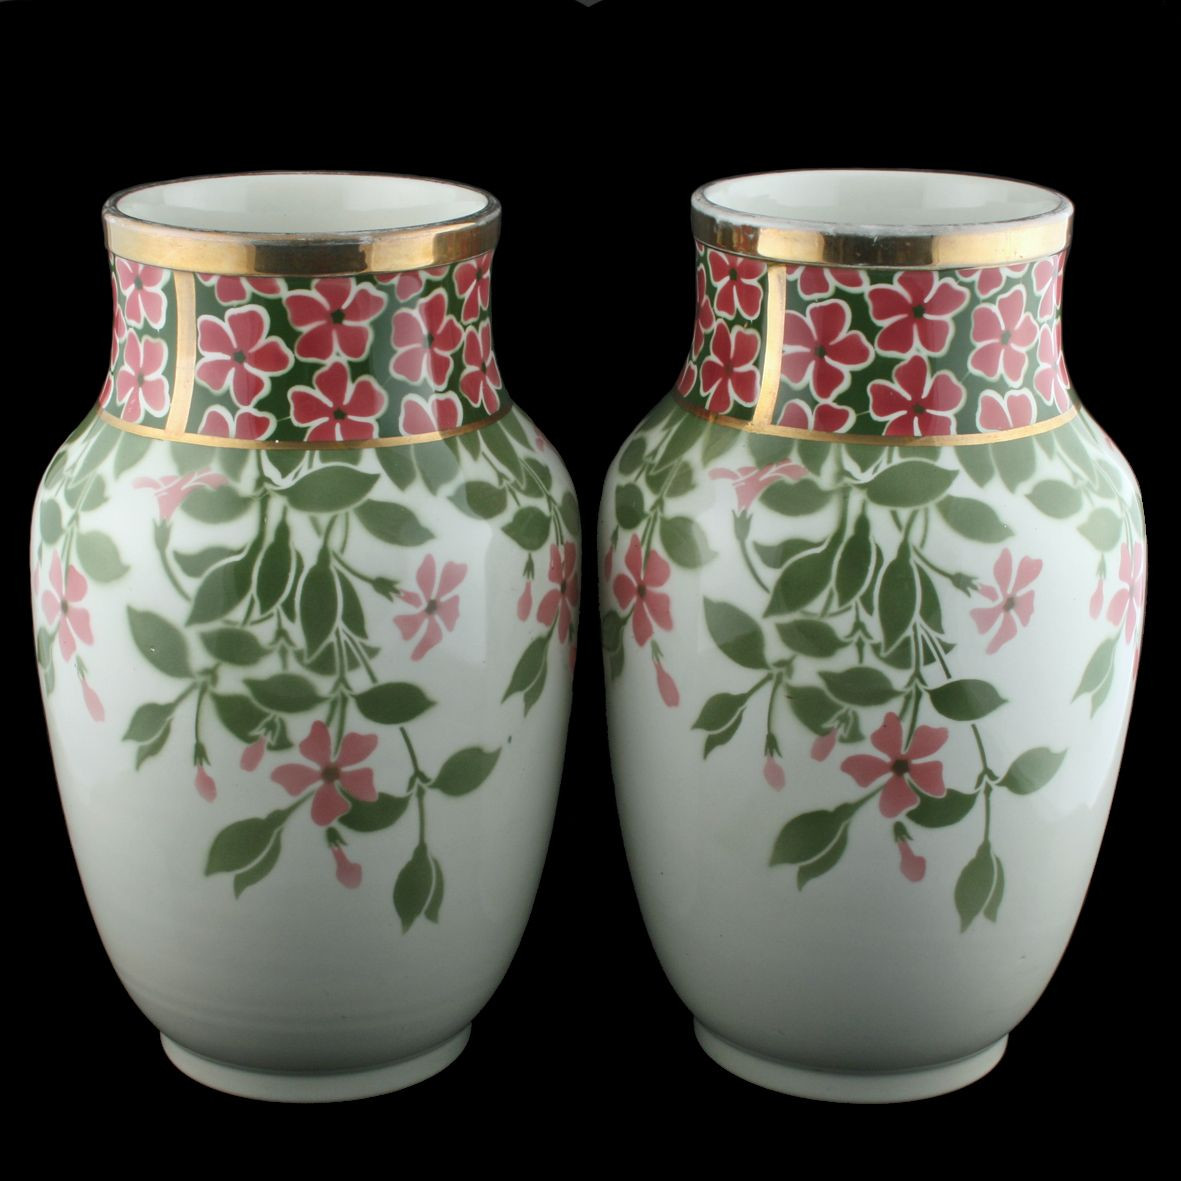 13 Stylish Log Vases for Sale 2024 free download log vases for sale of pair of luneville pottery vases pottery vase and pottery with large pair of early century french pottery vases by kg luneville these impressive antique vases are availa